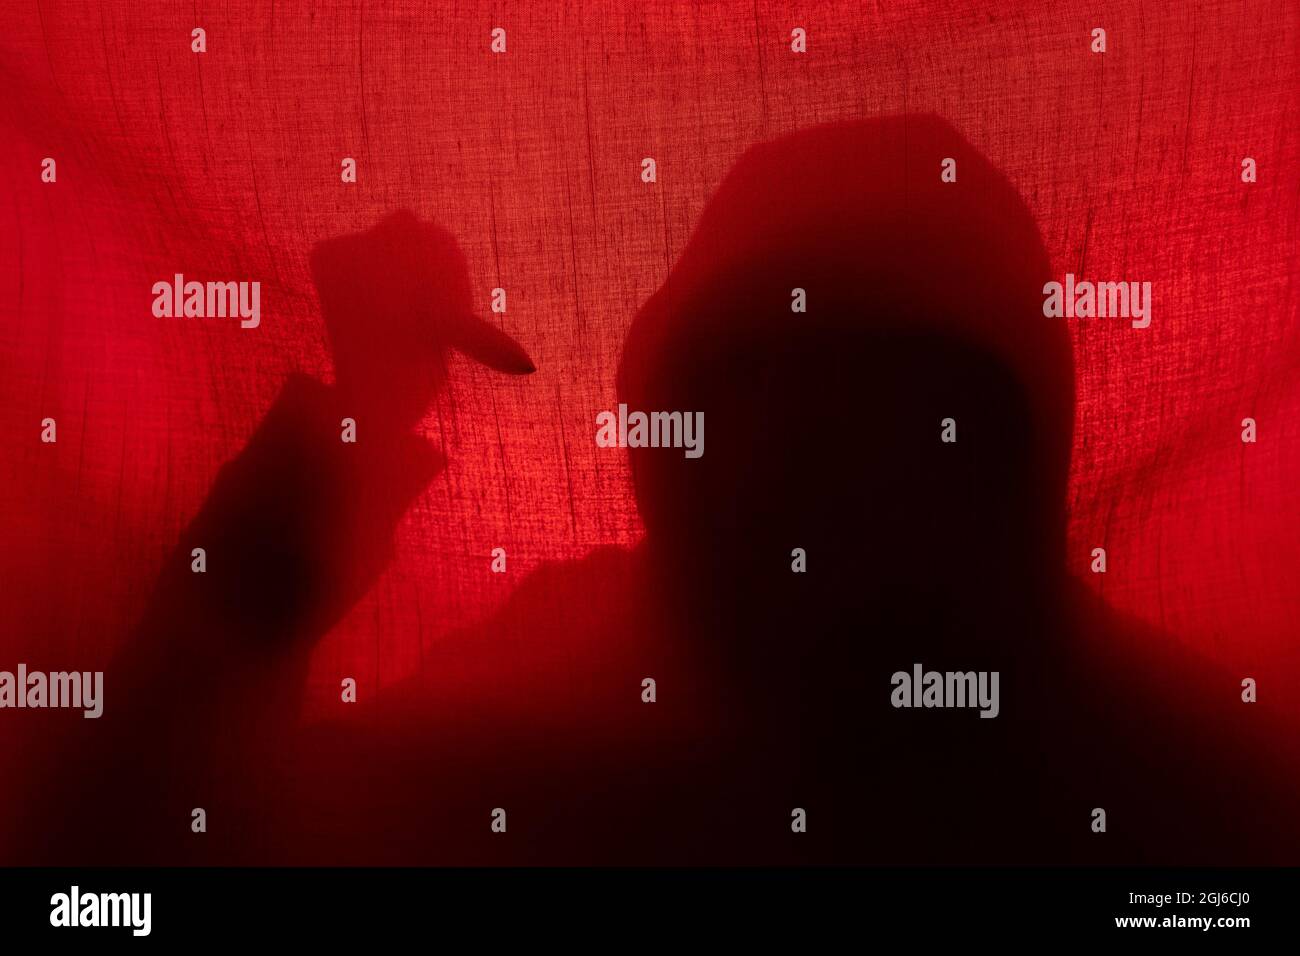 Man with a knife silhouette behind a curtain. Halloween and violence concept Stock Photo